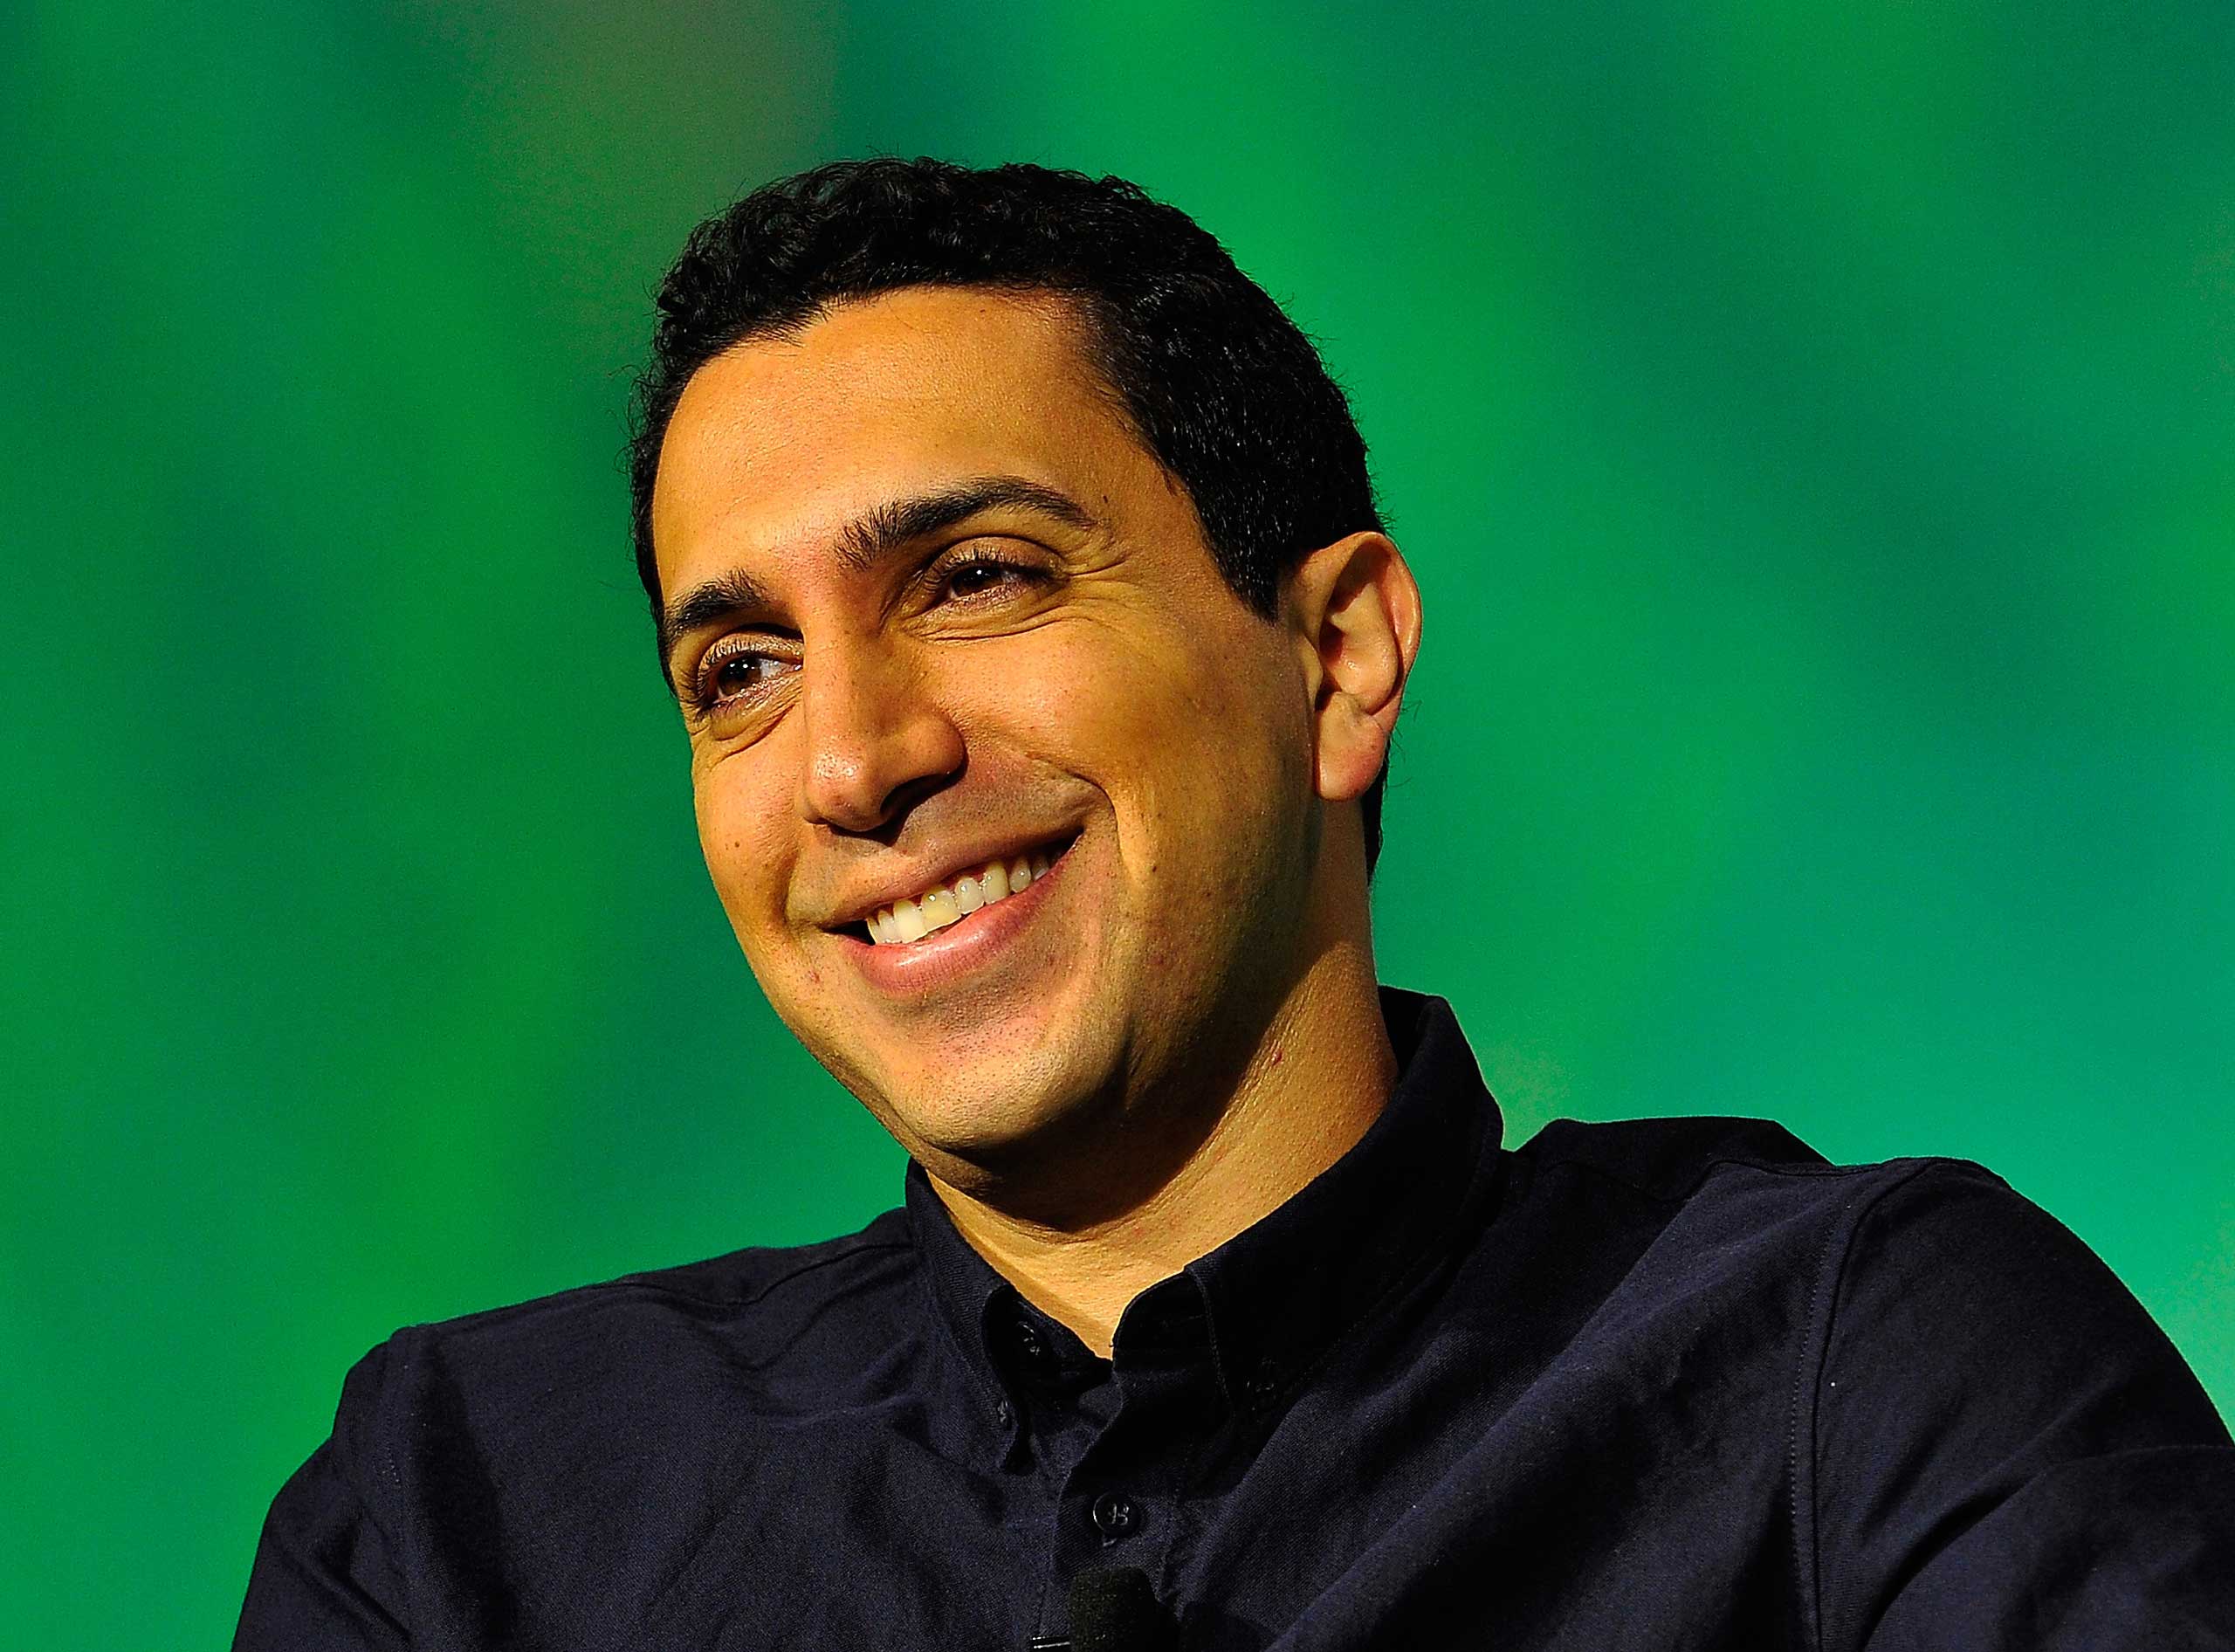 Tinder Co-Founder and CEO Sean Rad speaks onstage at TechCrunch Disrupt at Pier 48 on Sept. 10, 2014 in San Francisco. (Steve Jennings—Getty Images)